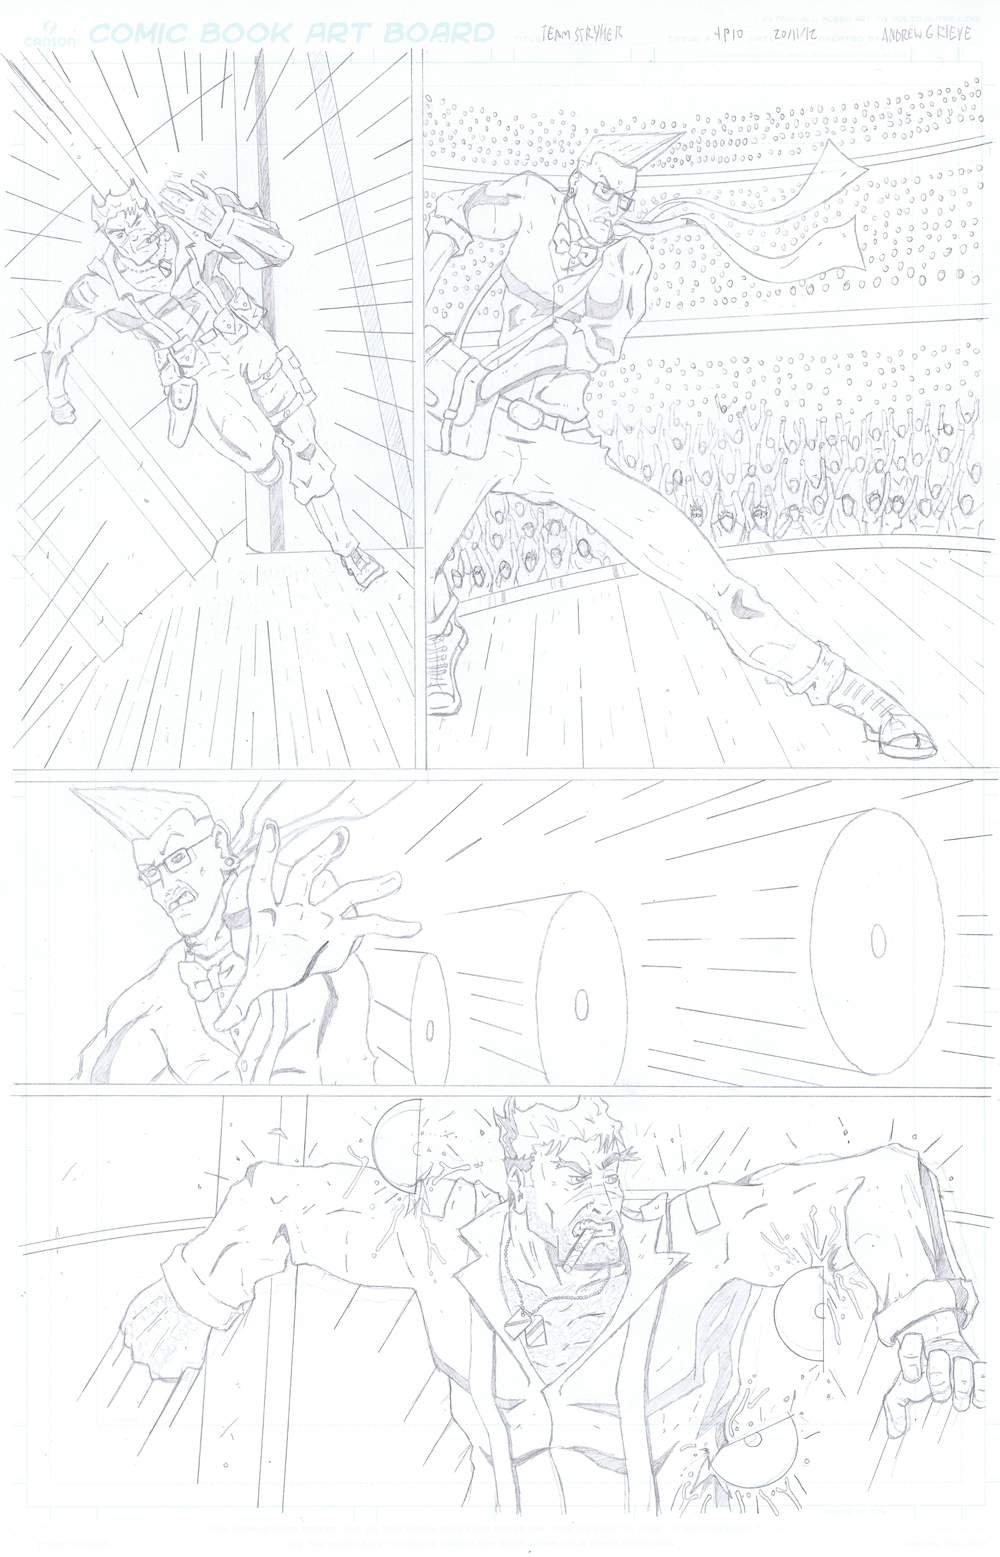 MISSION 004: PAGE 10 PENCIL